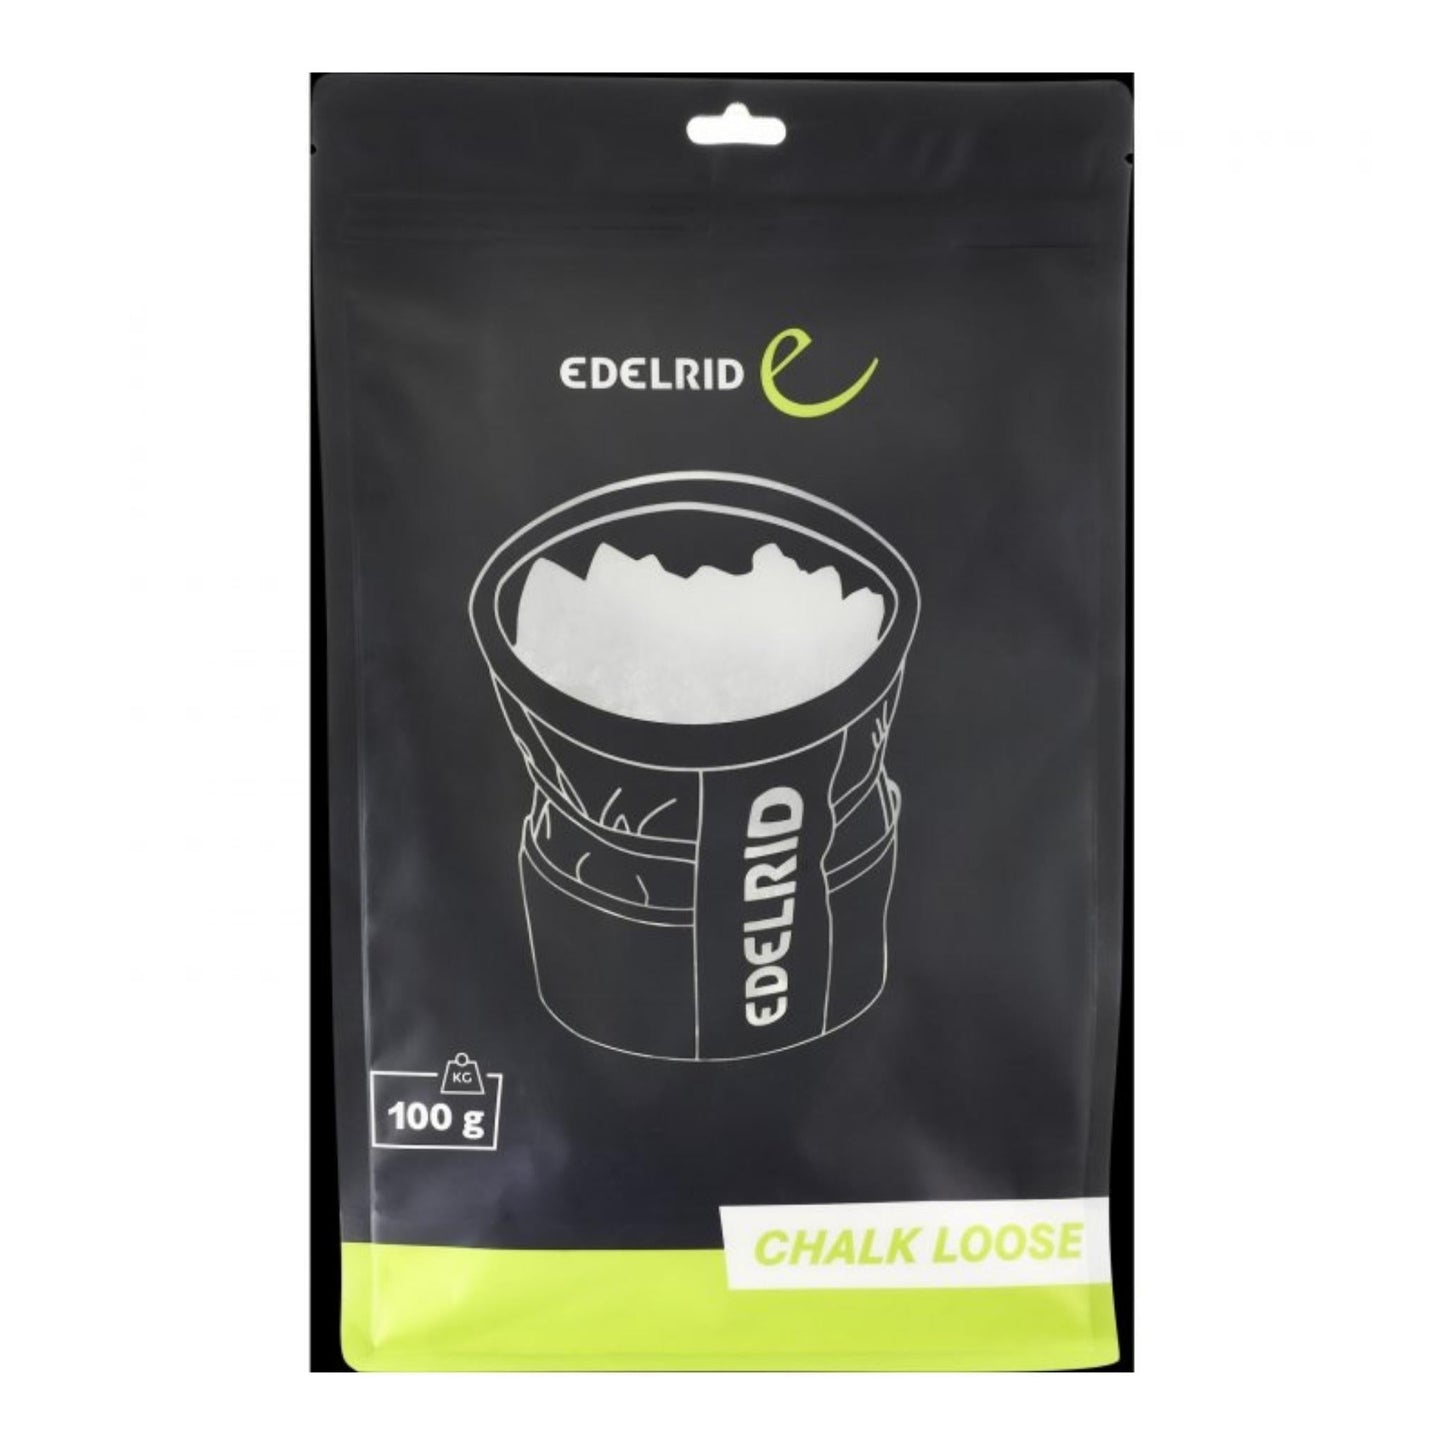 Edelrid - Chalk Loose - Climbing Accessories - 100g - The Cave Gym